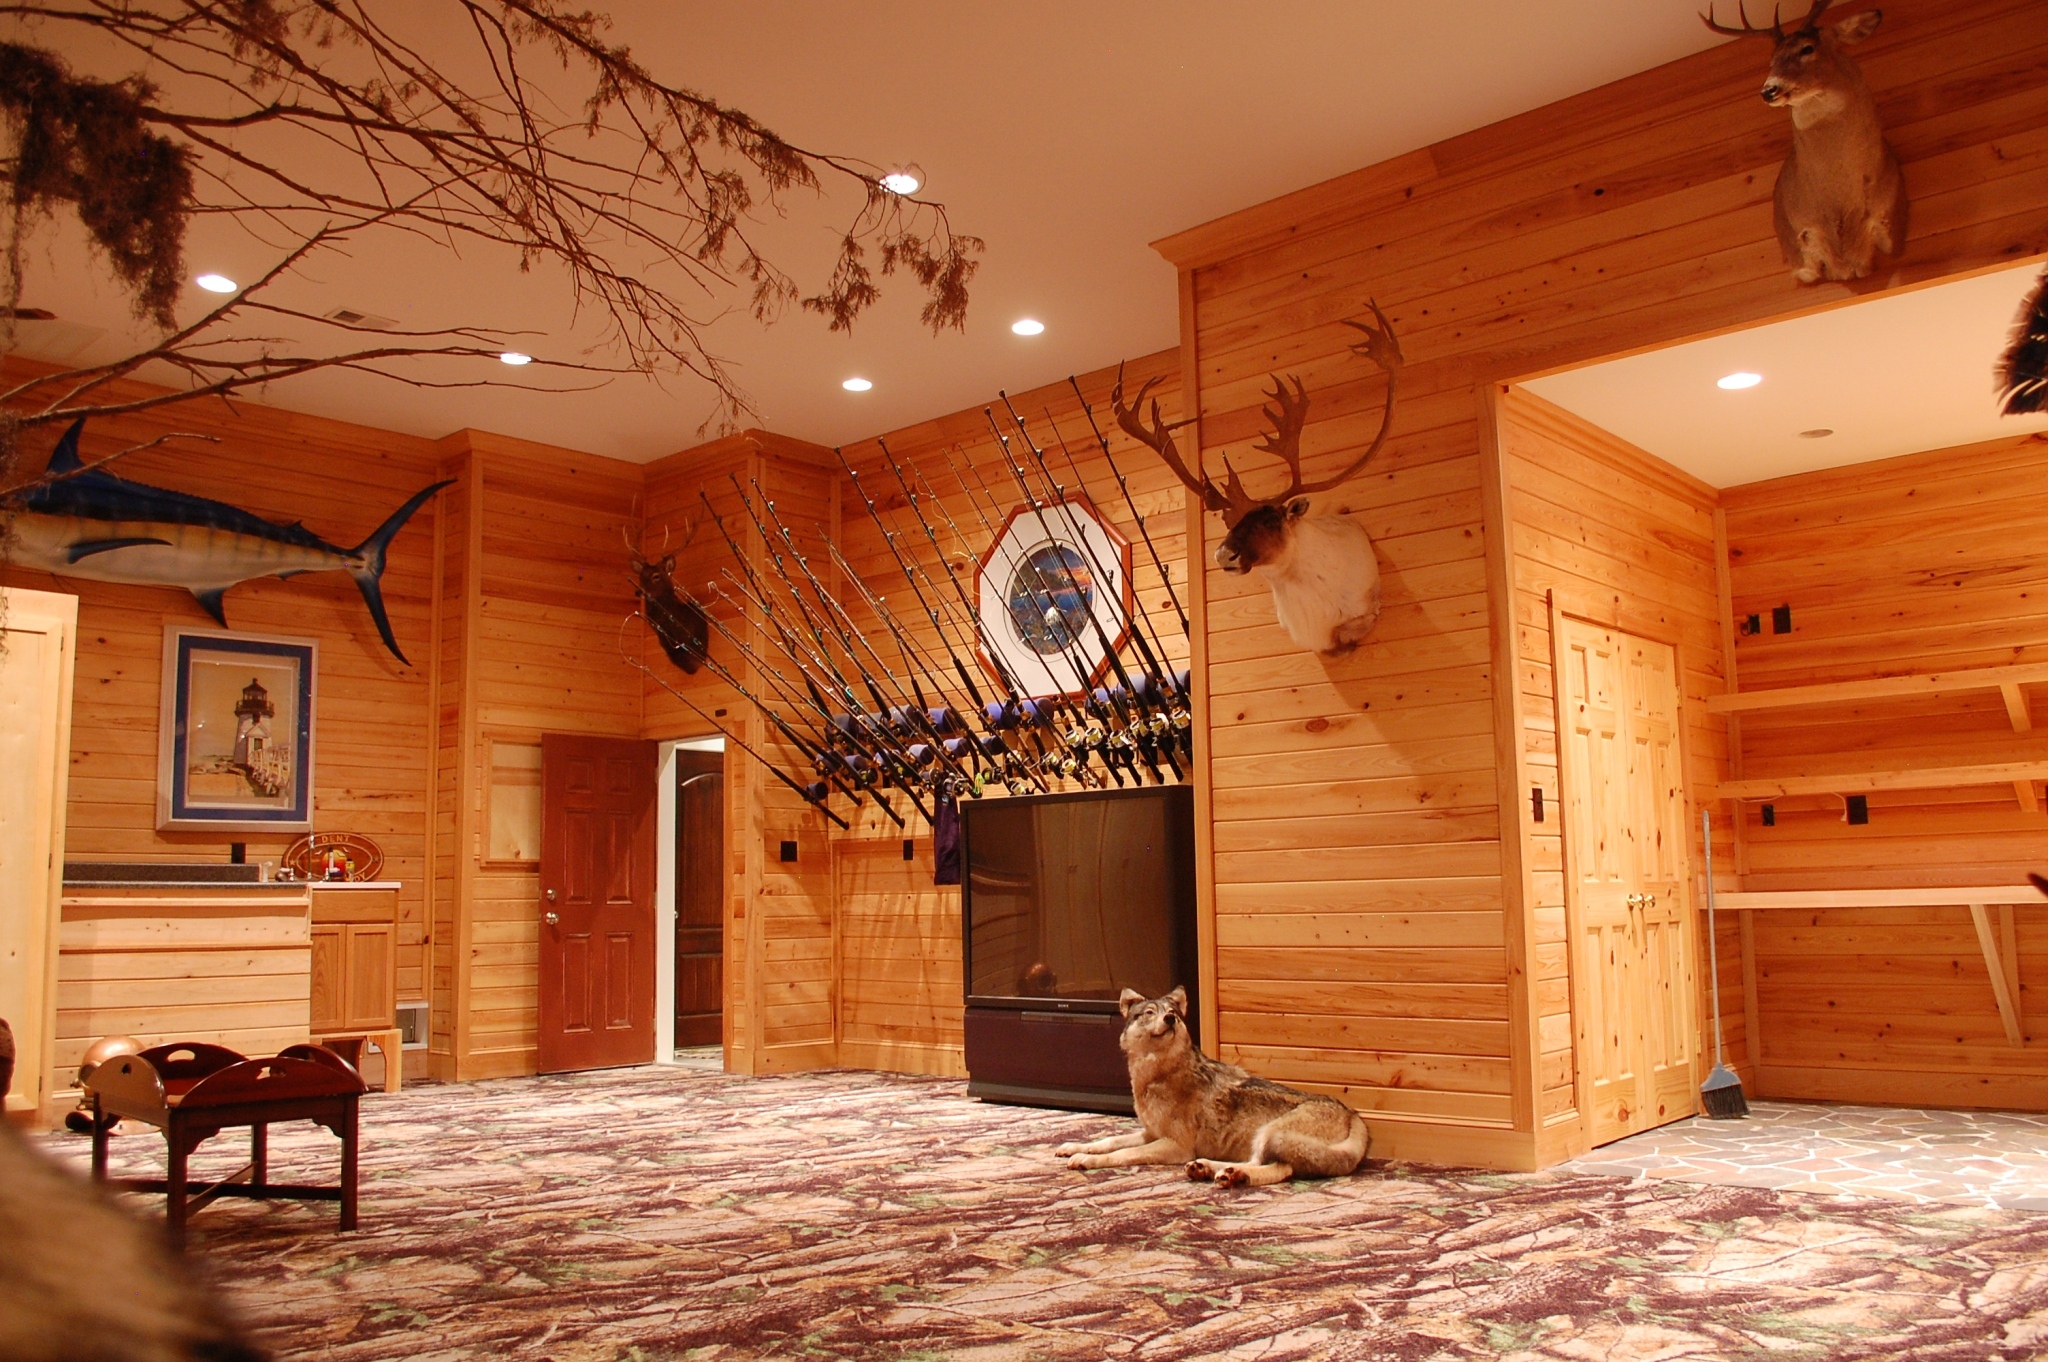 Best Hunting Man Cave Decor Ideas for Your Home